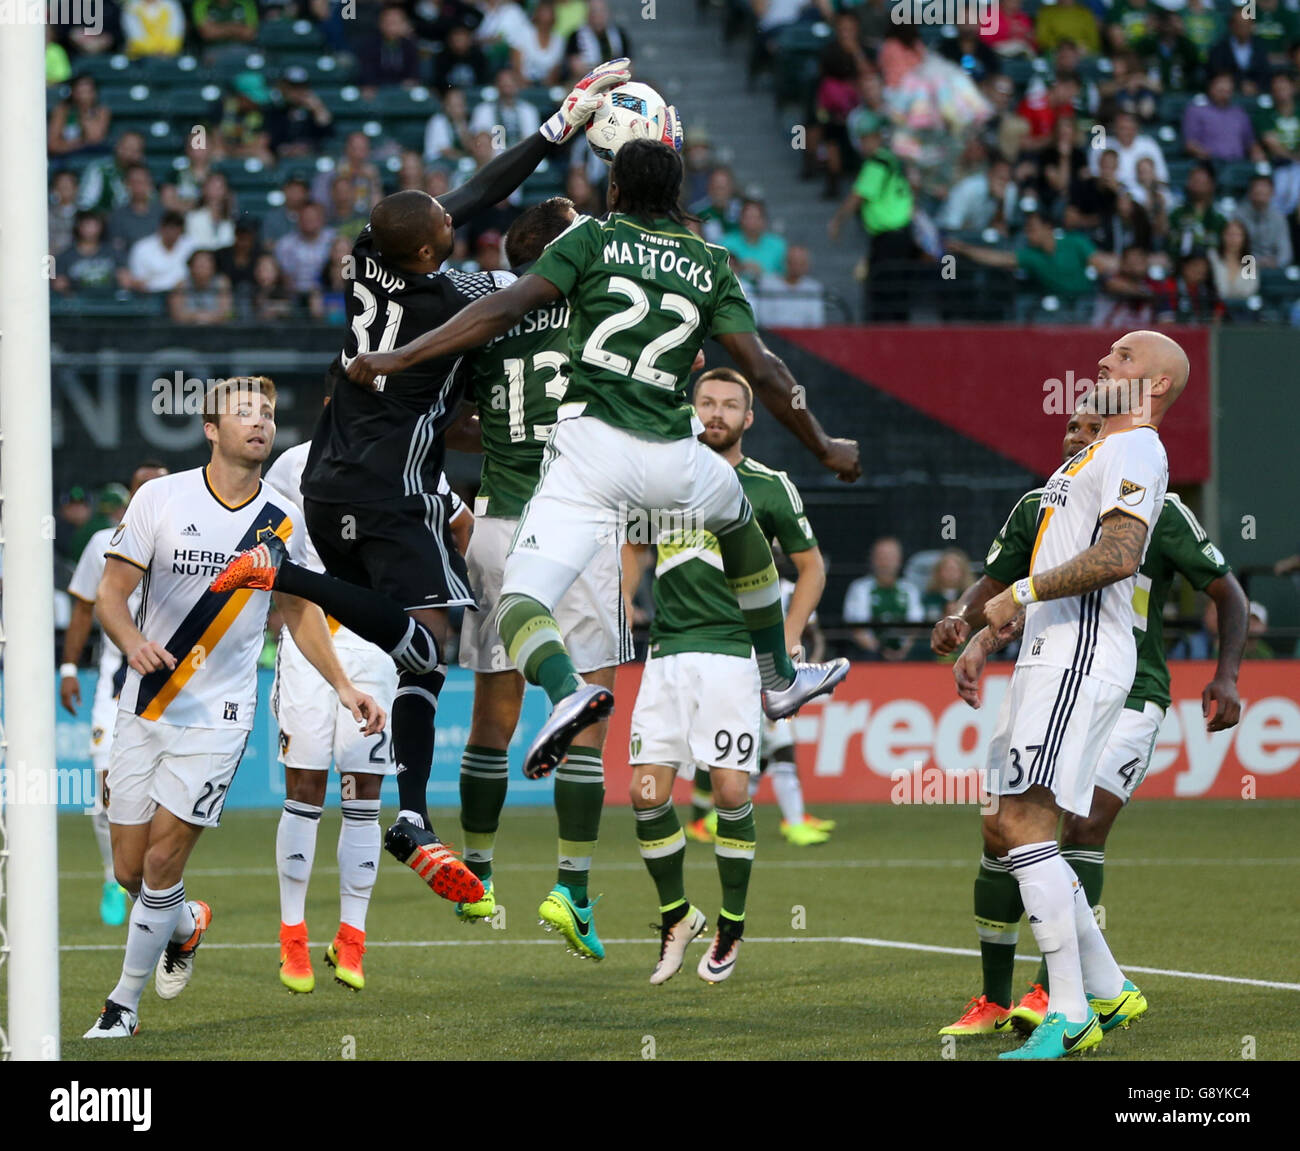 Portland, Oregon, USA. June 29, 2016 - Galaxy keeper, CLEMENT DIOP (31) makes a save in the box. The Portland Timbers FC play the LA Galaxy on June 29, 2016: Portland, OR USA; at Providence Park. Photo by David Blair Credit:  David Blair/ZUMA Wire/Alamy Live News Stock Photo